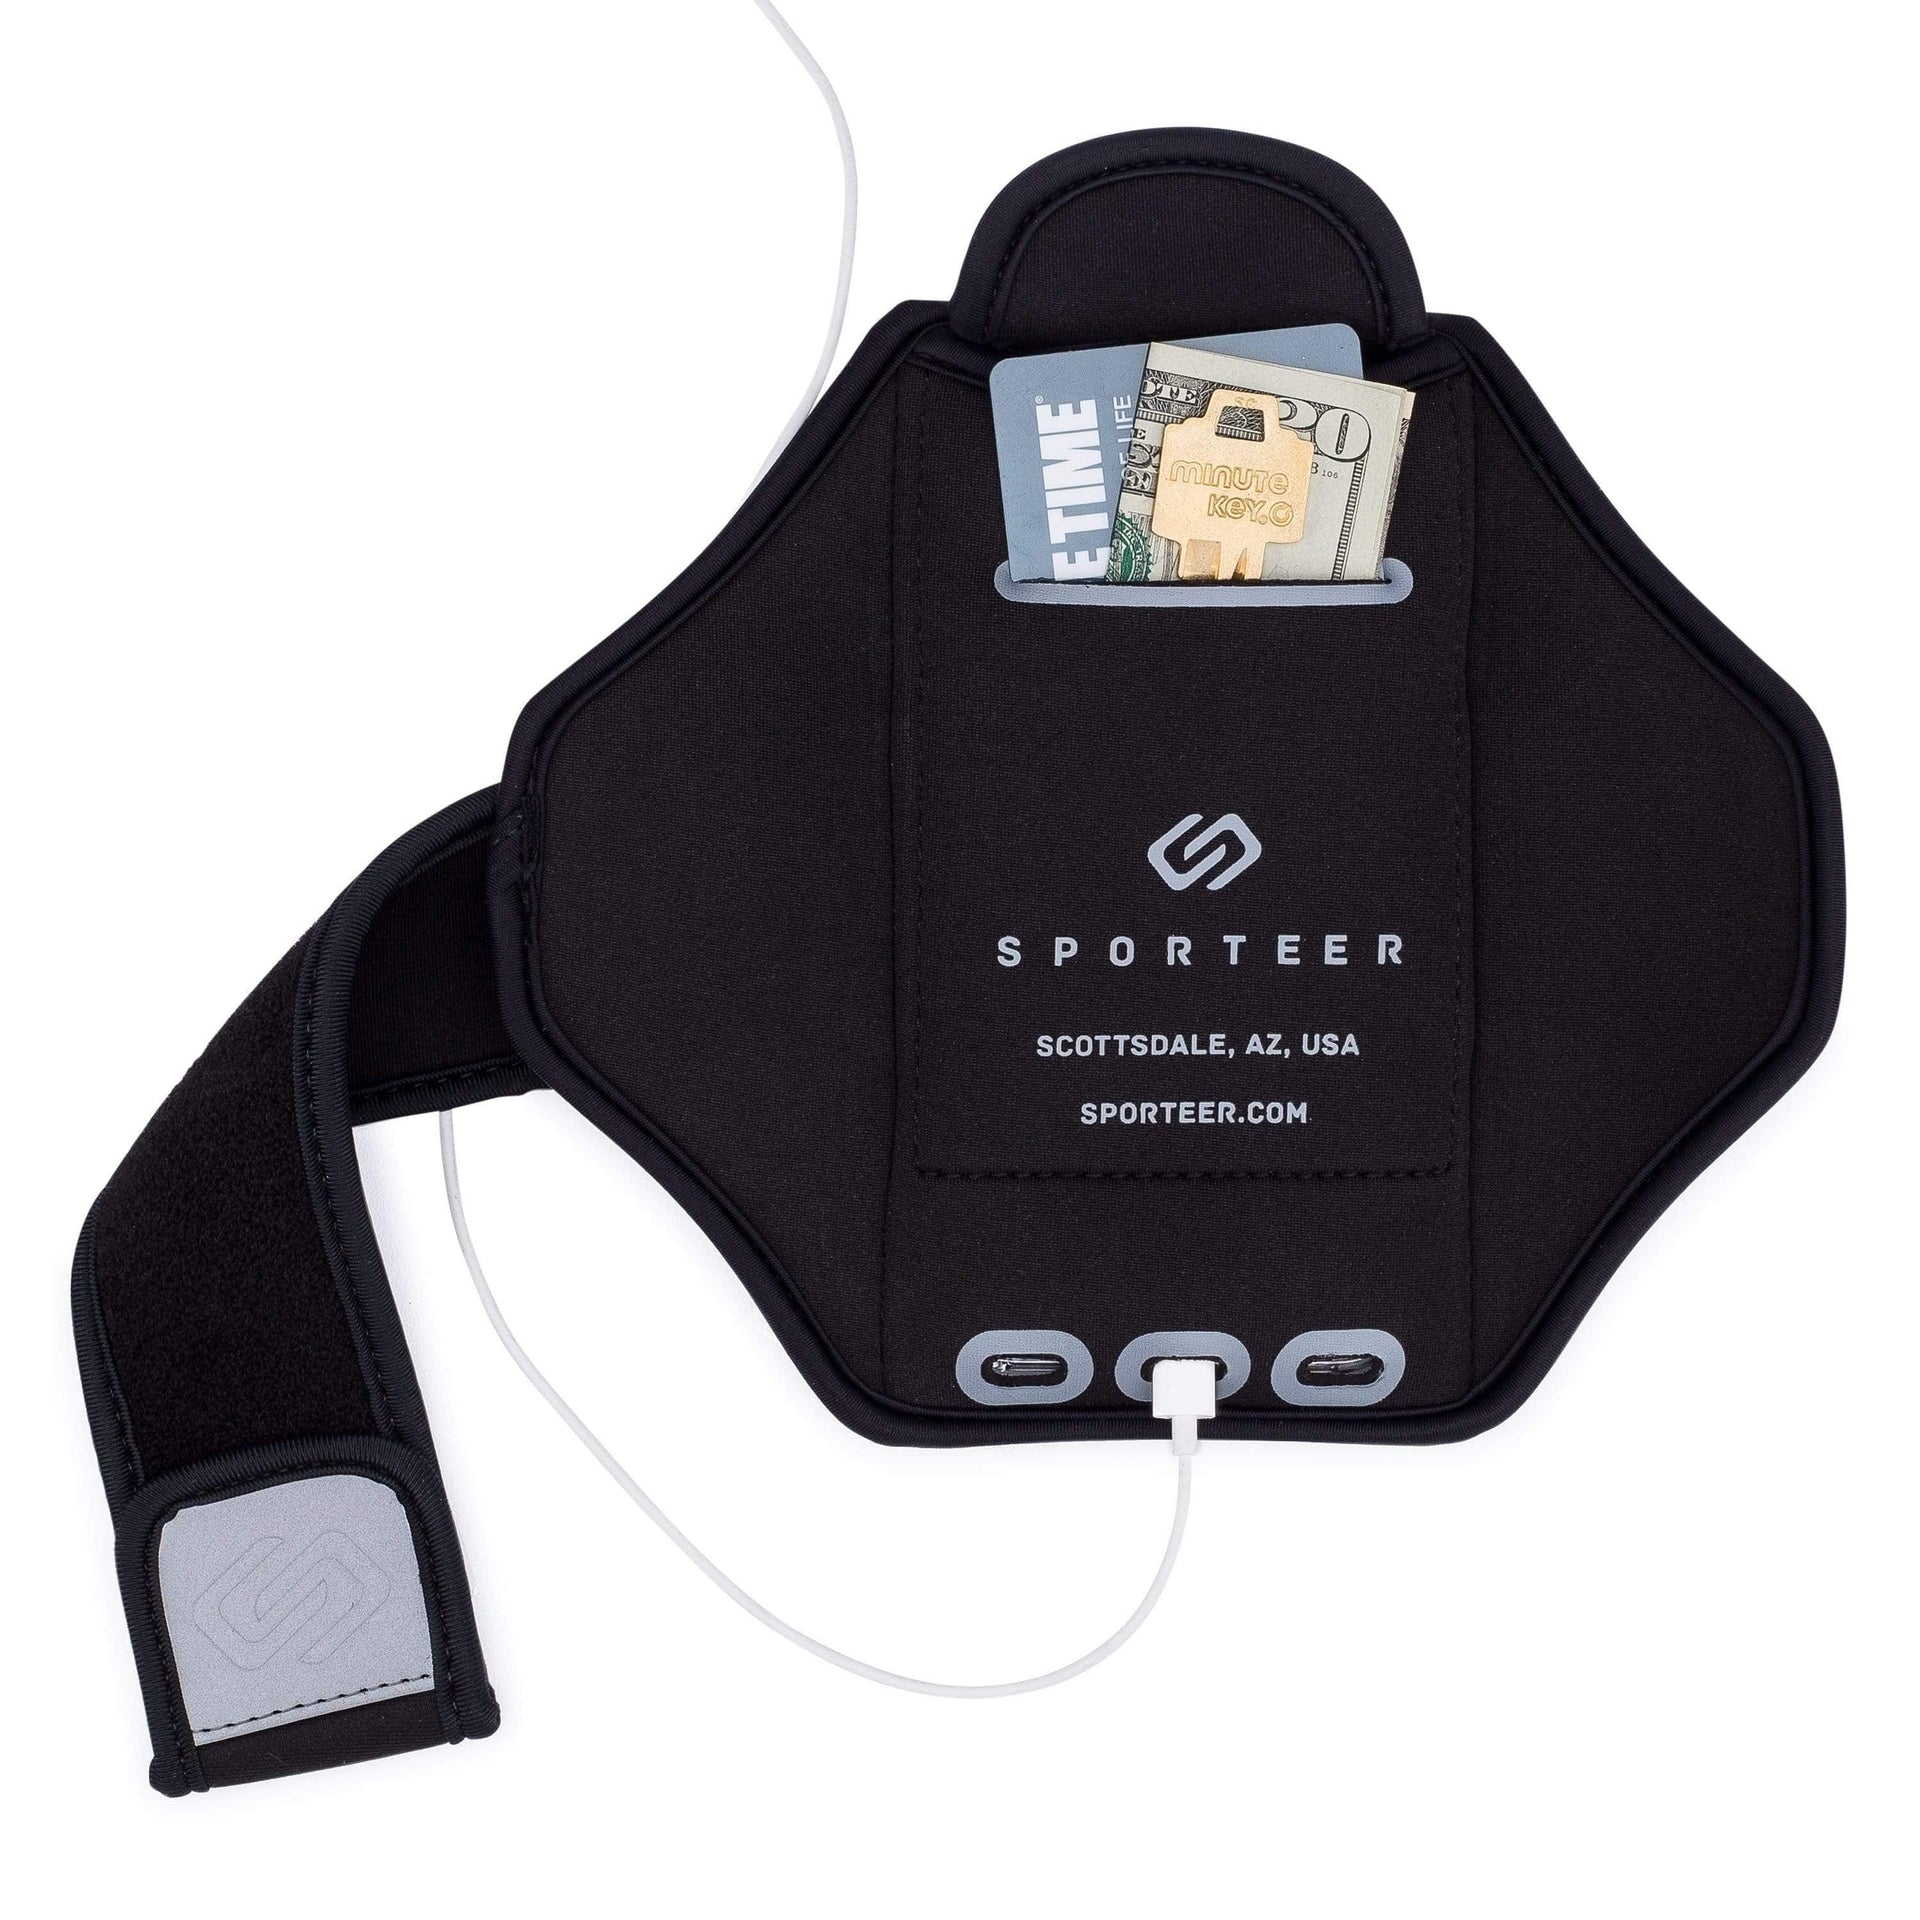 iPhone Running Armband Case and Phone Holder